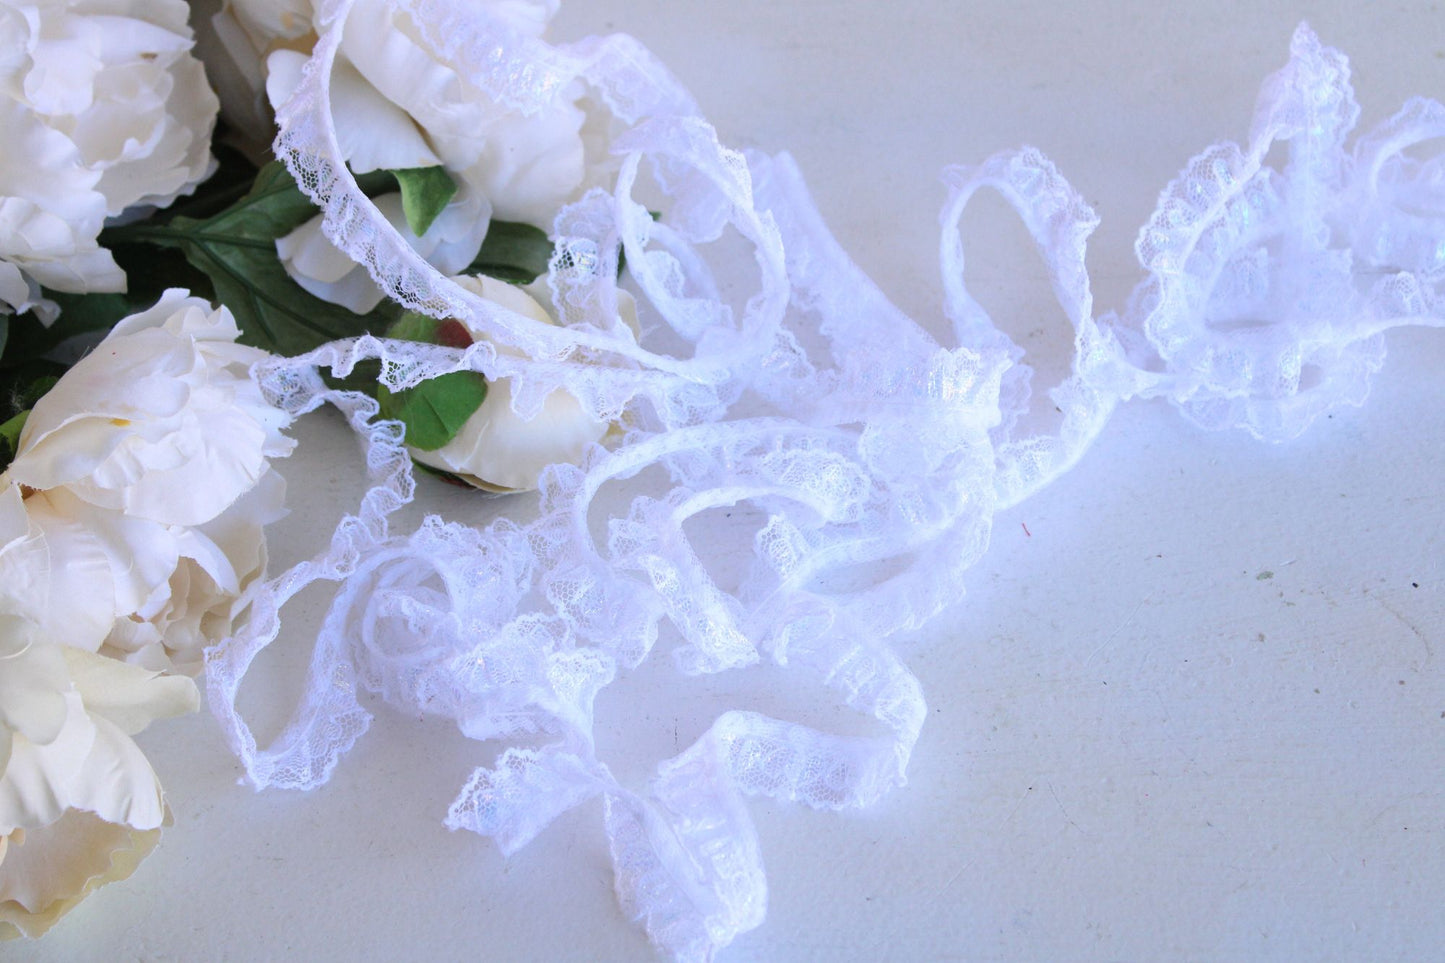 Vintage Ruffled Lace Trim, White with Glittery Hearts,  .75" Wide, 4 yards